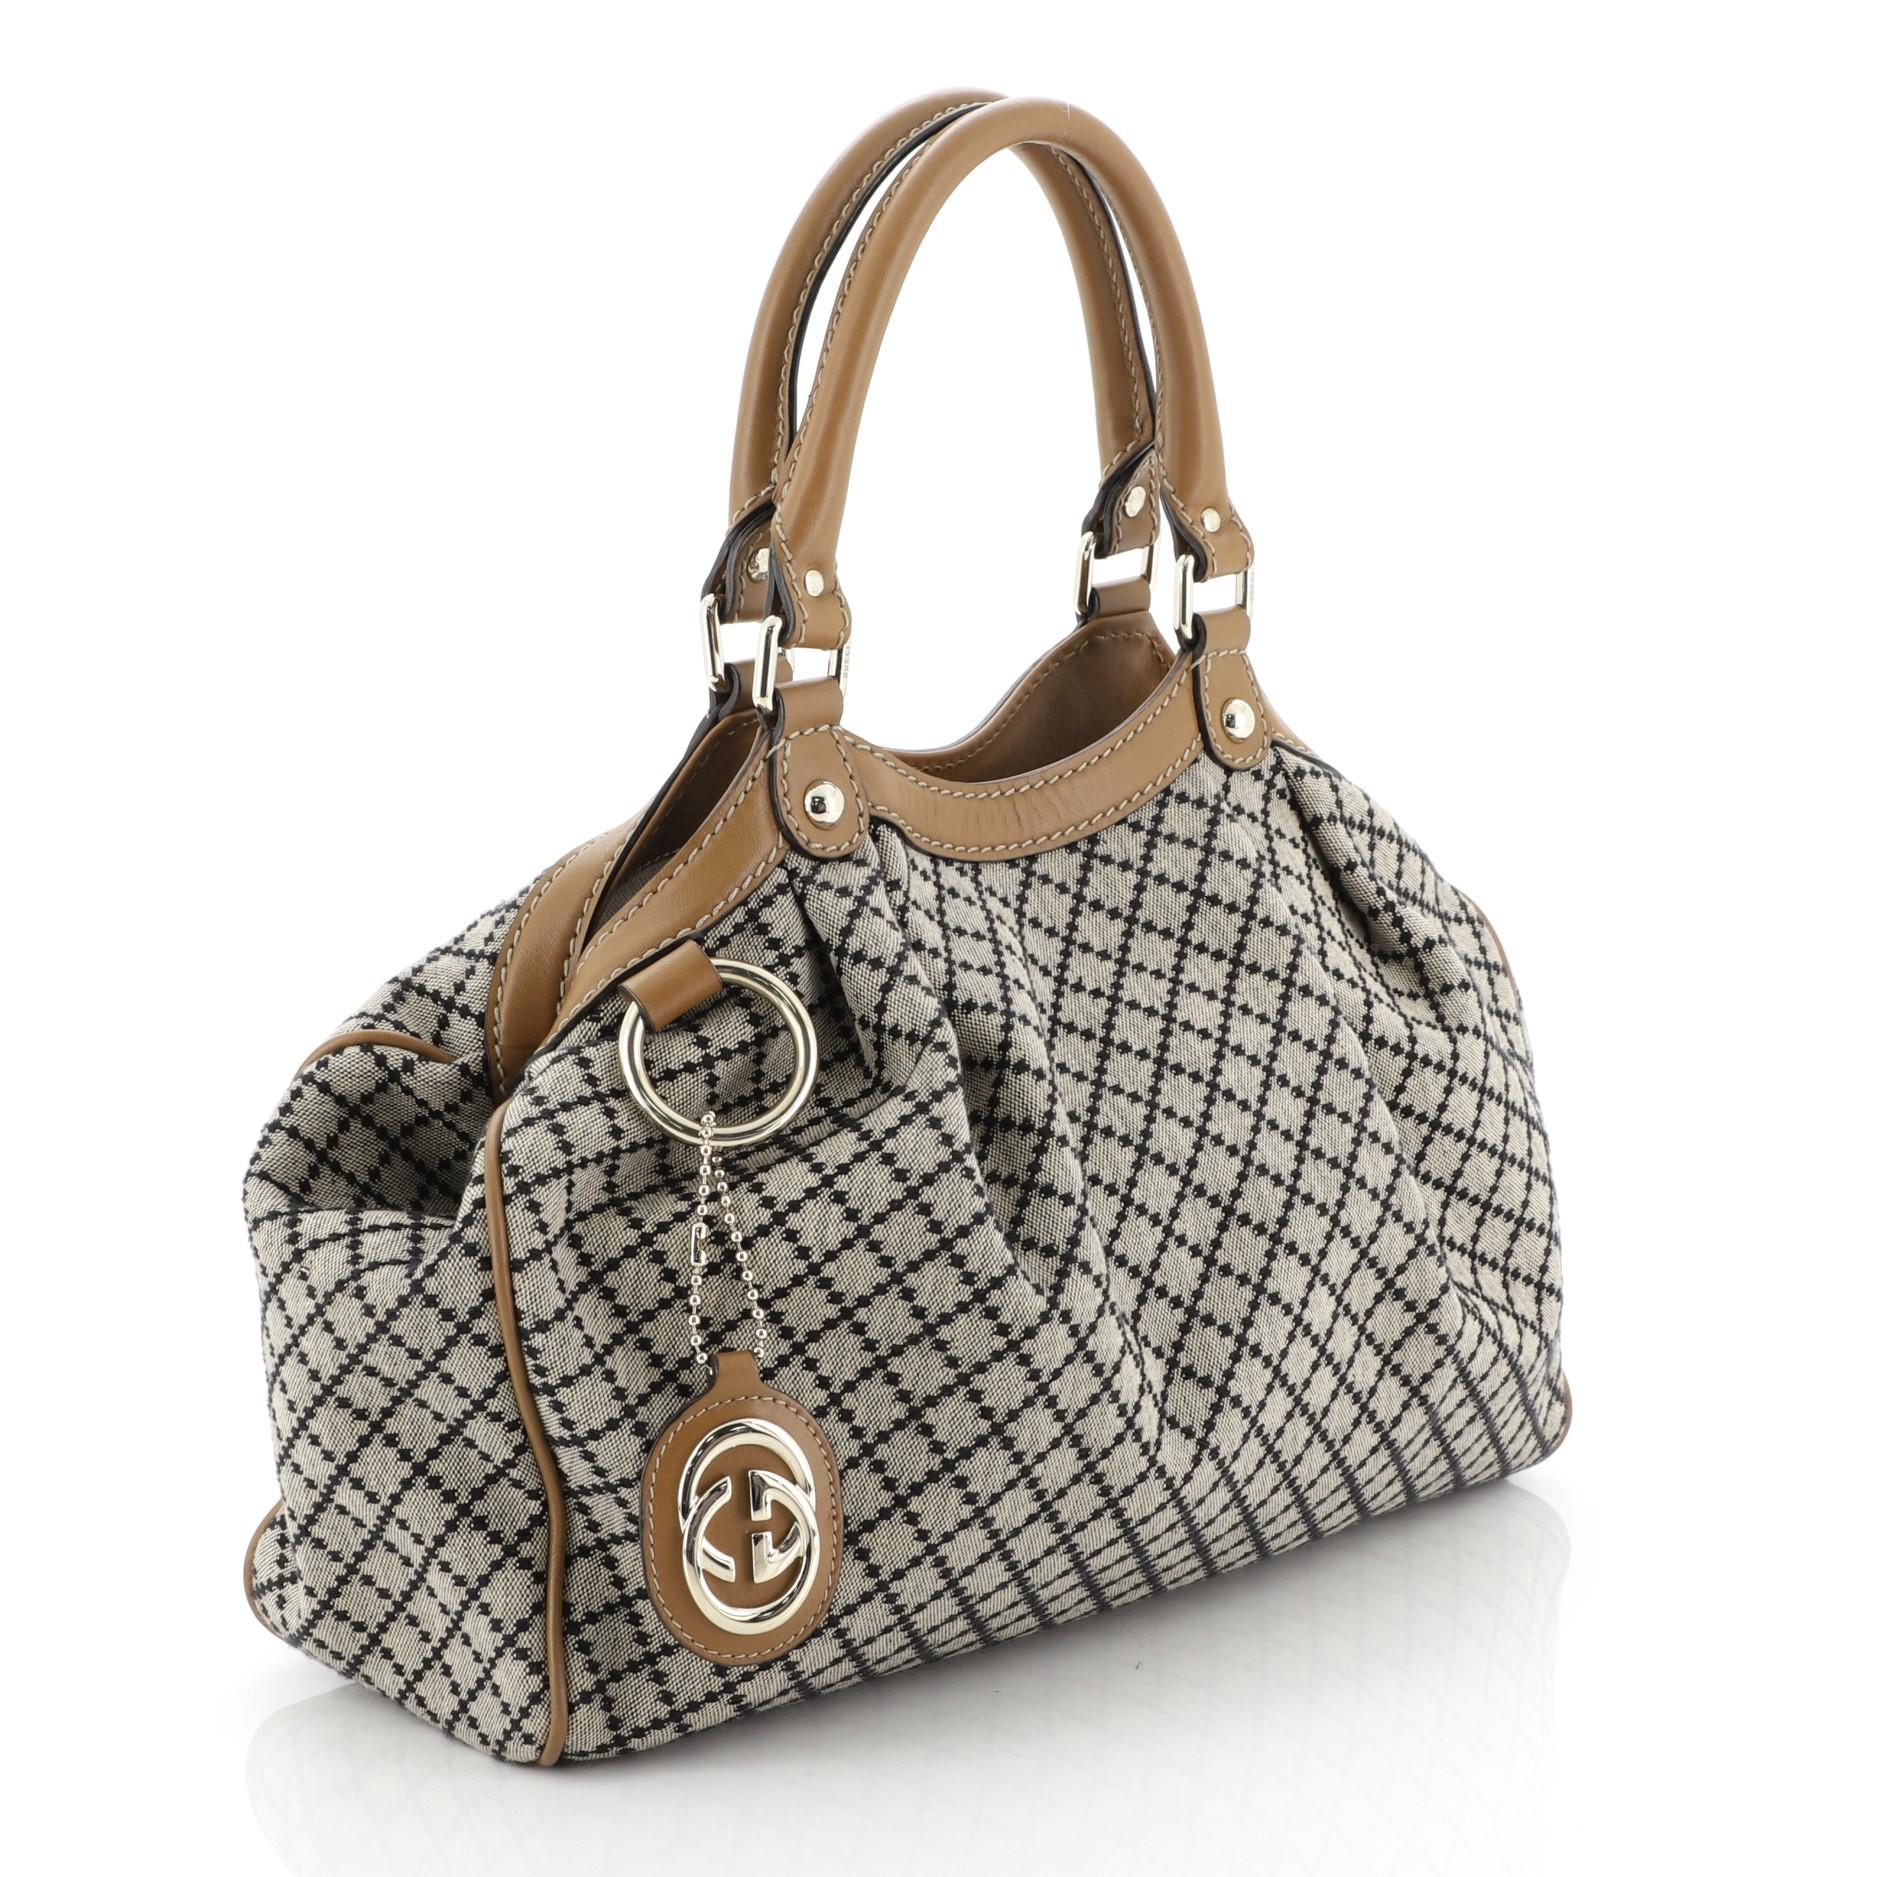 This Gucci Sukey Tote Diamante Canvas Medium, crafted from brown diamante canvas, features dual rolled leather handles, leather trim and gold-tone hardware. Its magnetic snap closure opens to a neutral fabric interior with zip pocket.

Estimated